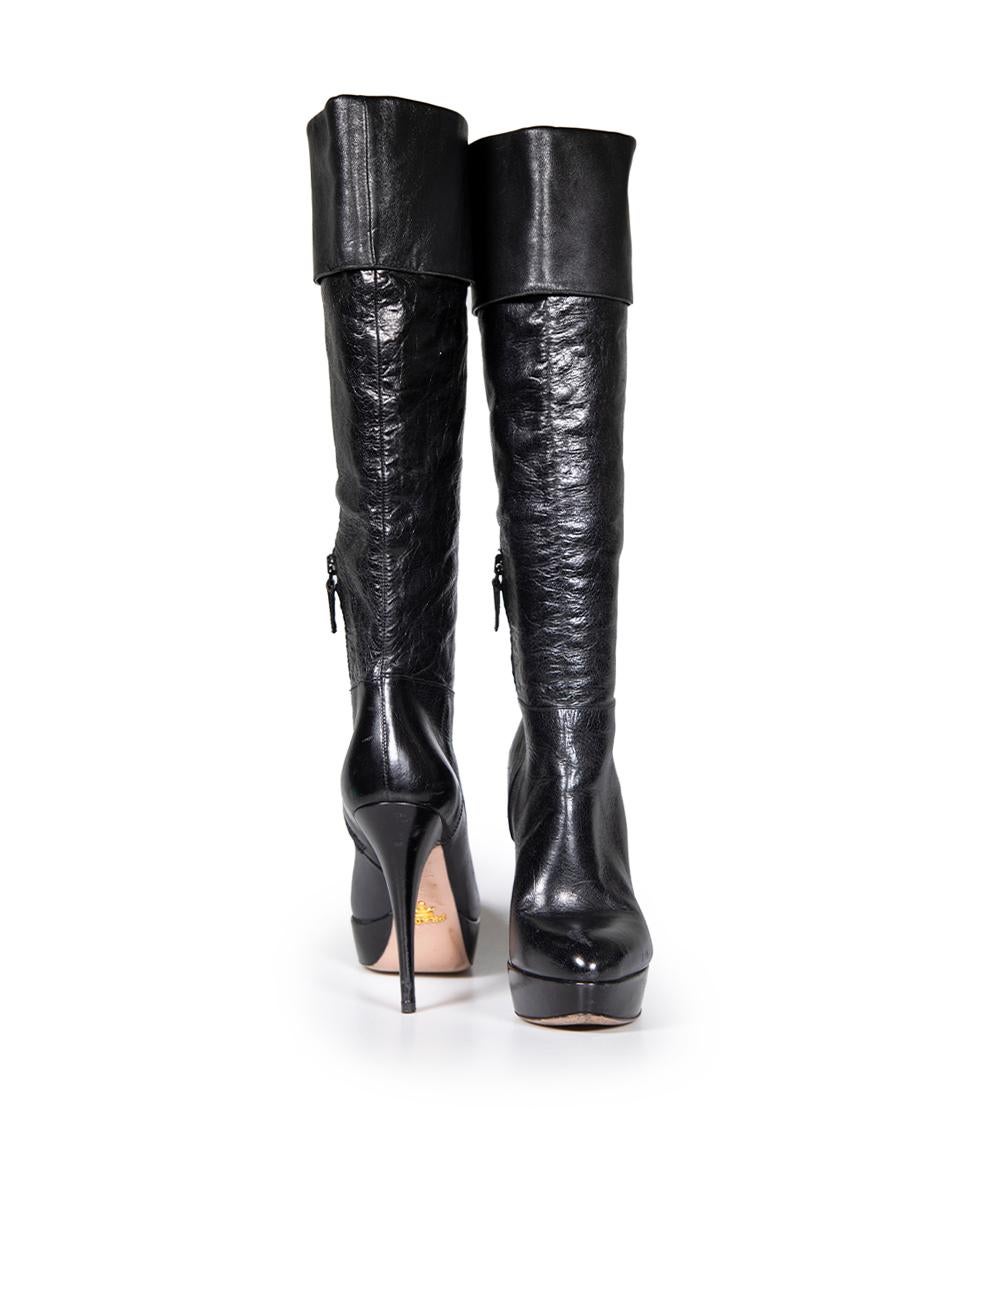 Prada Black Leather Knee High Platform Boots Size IT 36 In Good Condition For Sale In London, GB